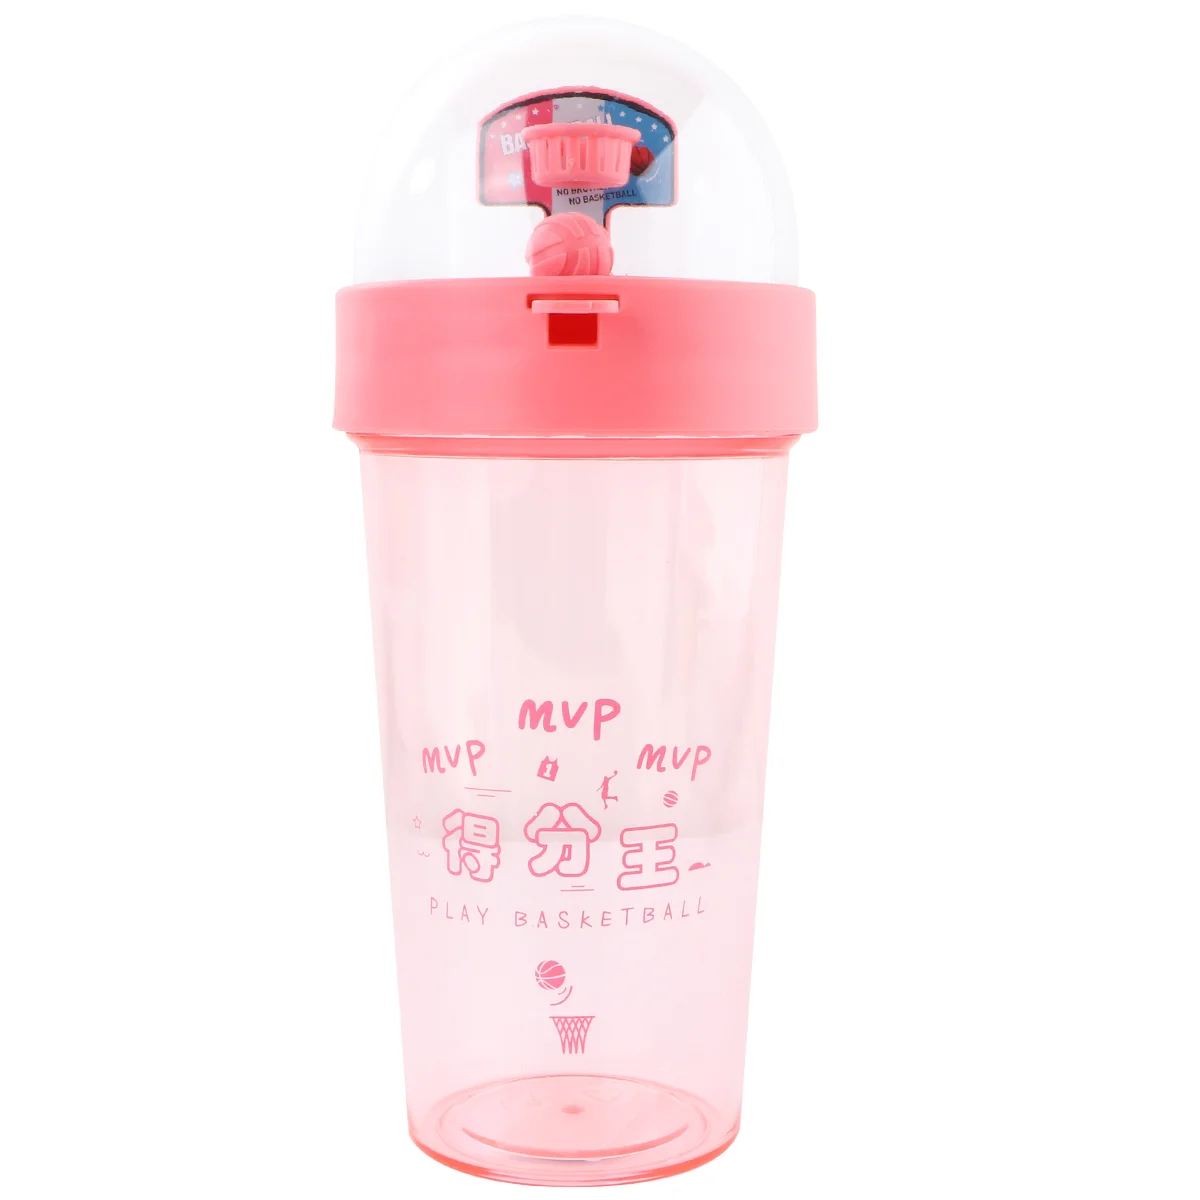 

Water Basketball Game Sports Drinking Kids Funny School Shooting Cup Gym Jug Fitness Beverage Jugs Exercise Boys Fun Drink